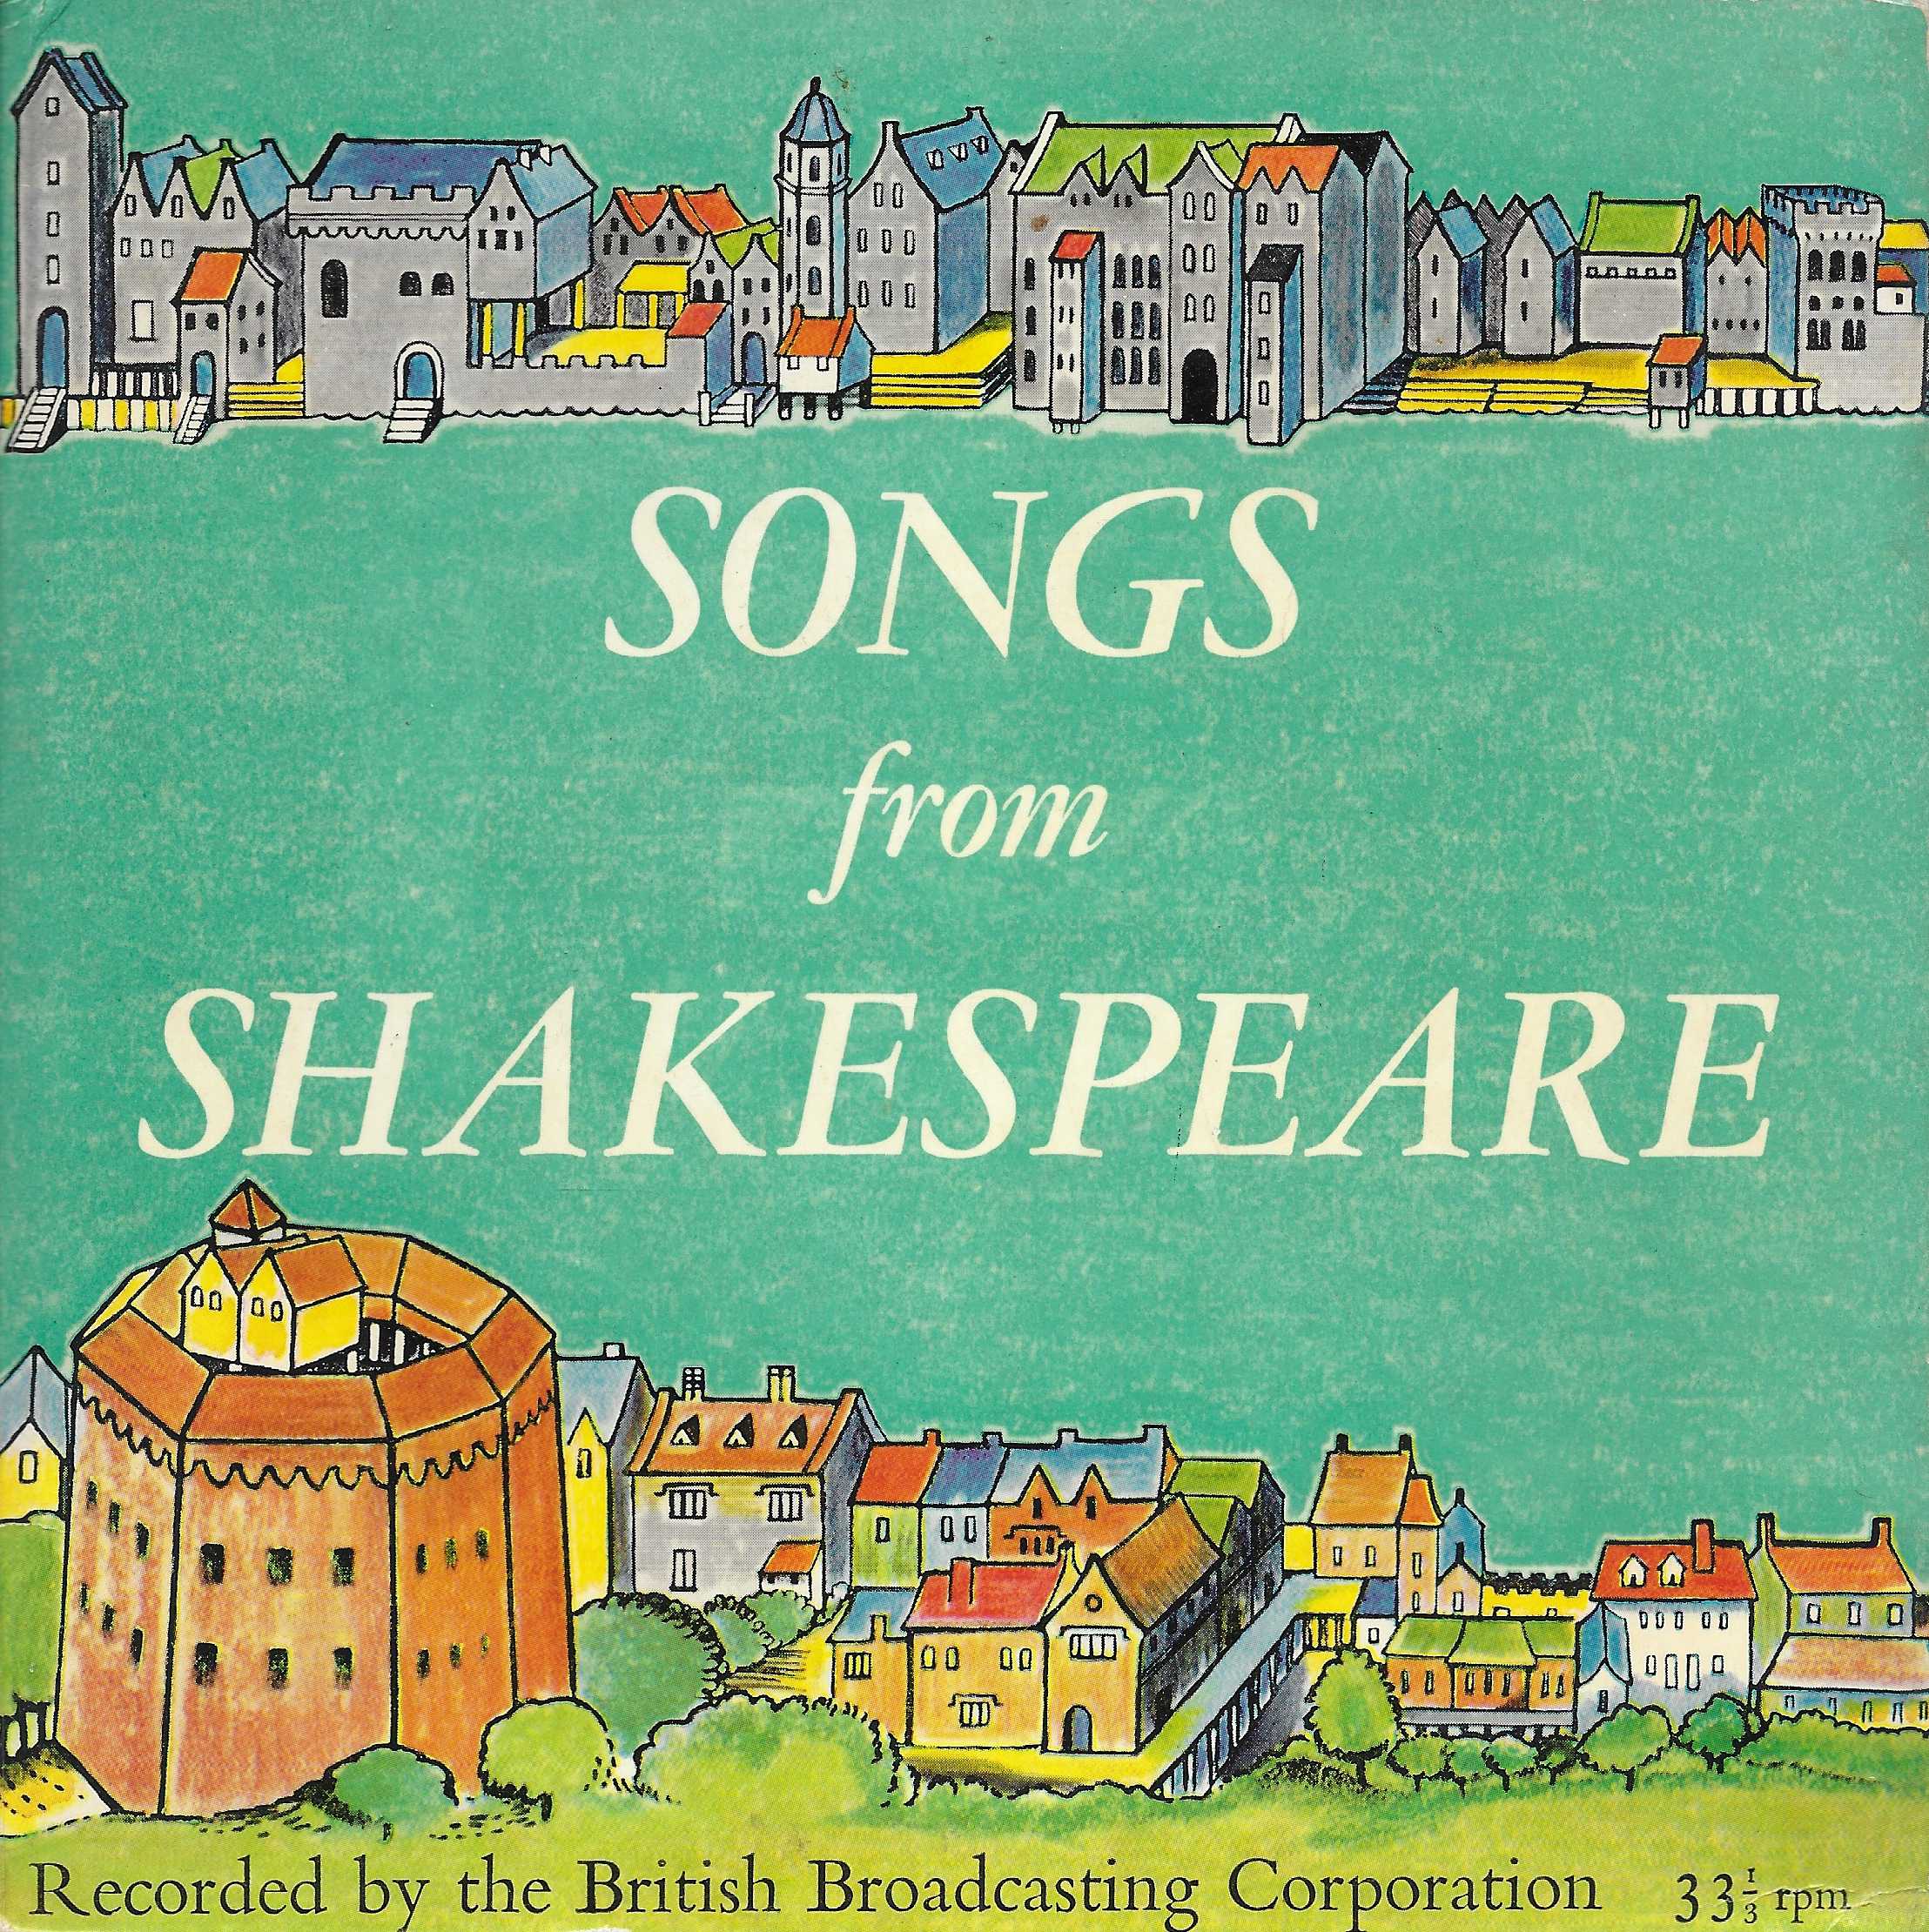 Picture of Songs from Shakespeare by artist Elizabeth Robinson / Philip Todd / Arr. Norman Fraser from the BBC singles - Records and Tapes library